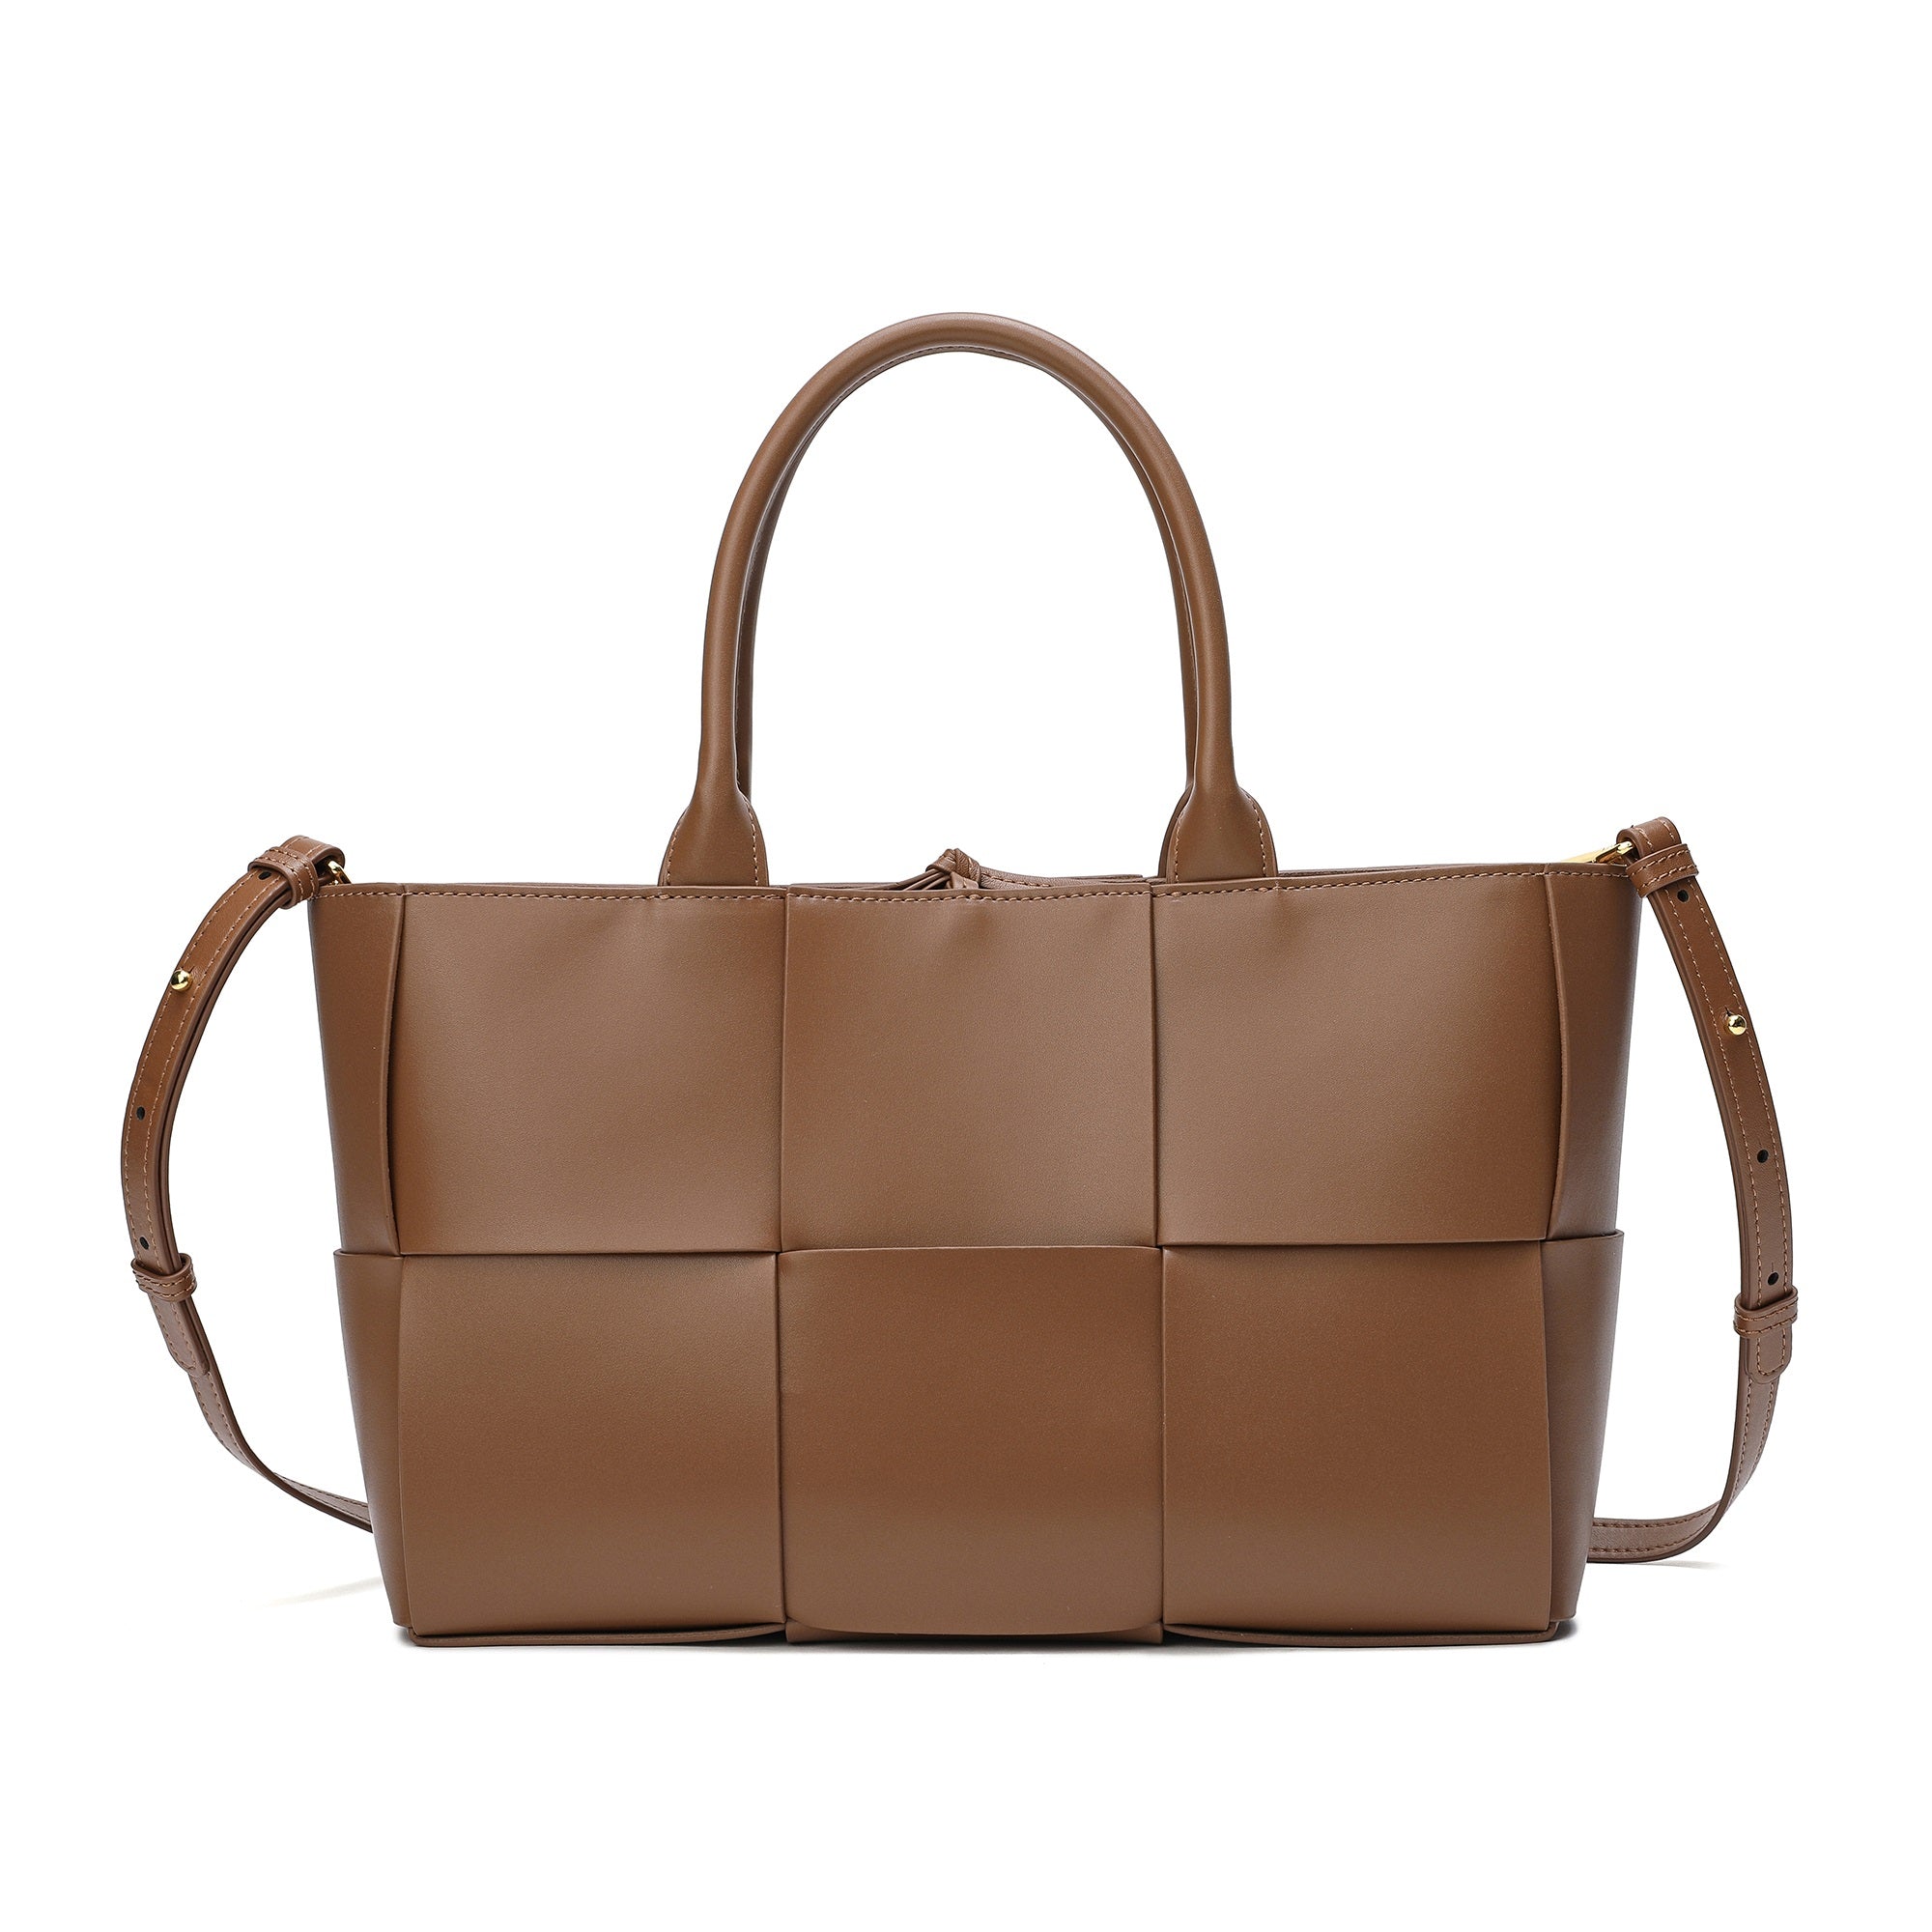 The Small Brown Leather Tote Bag